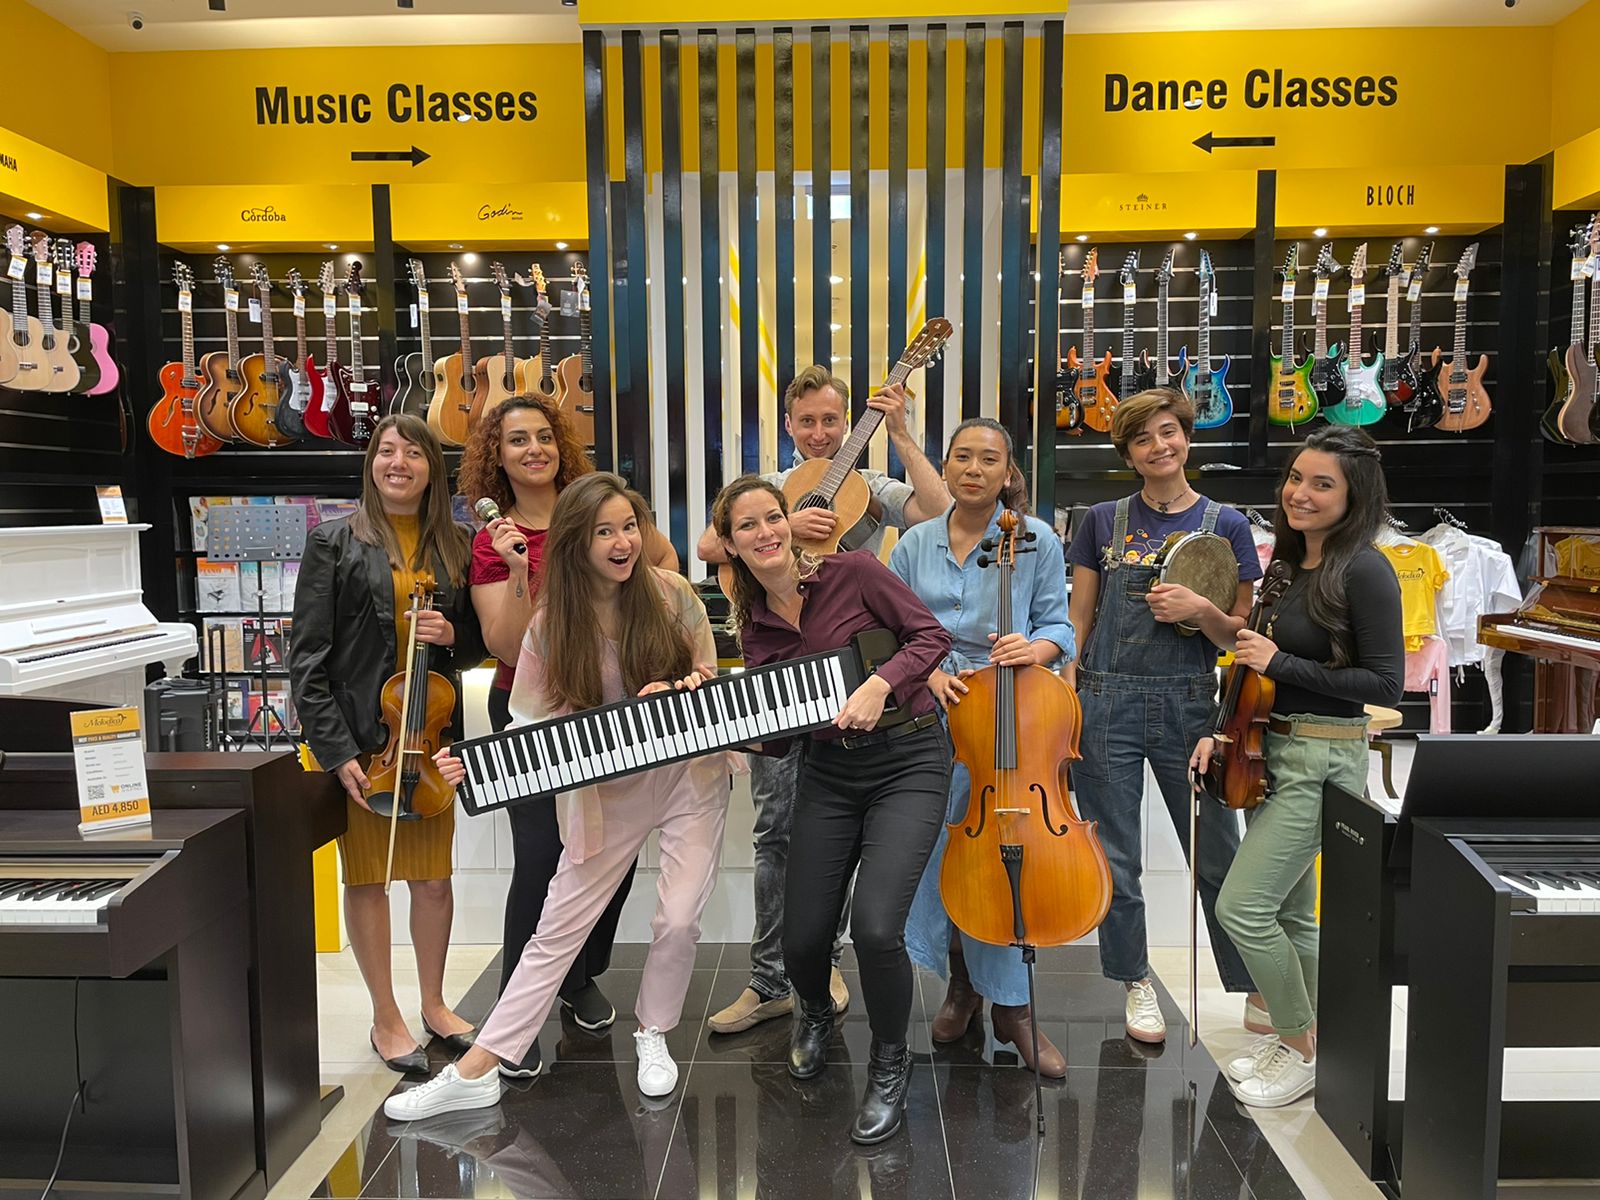 Private music lessons and group music classes at Melodica music school  in dubai,  Abu dhabi , Sharjah, Al Ain and Ajman,  Piano classes, Guitar classes, Singing classes, Violin Classes, Drums classes, Saxophone classes, Flute classes, ukulele classes